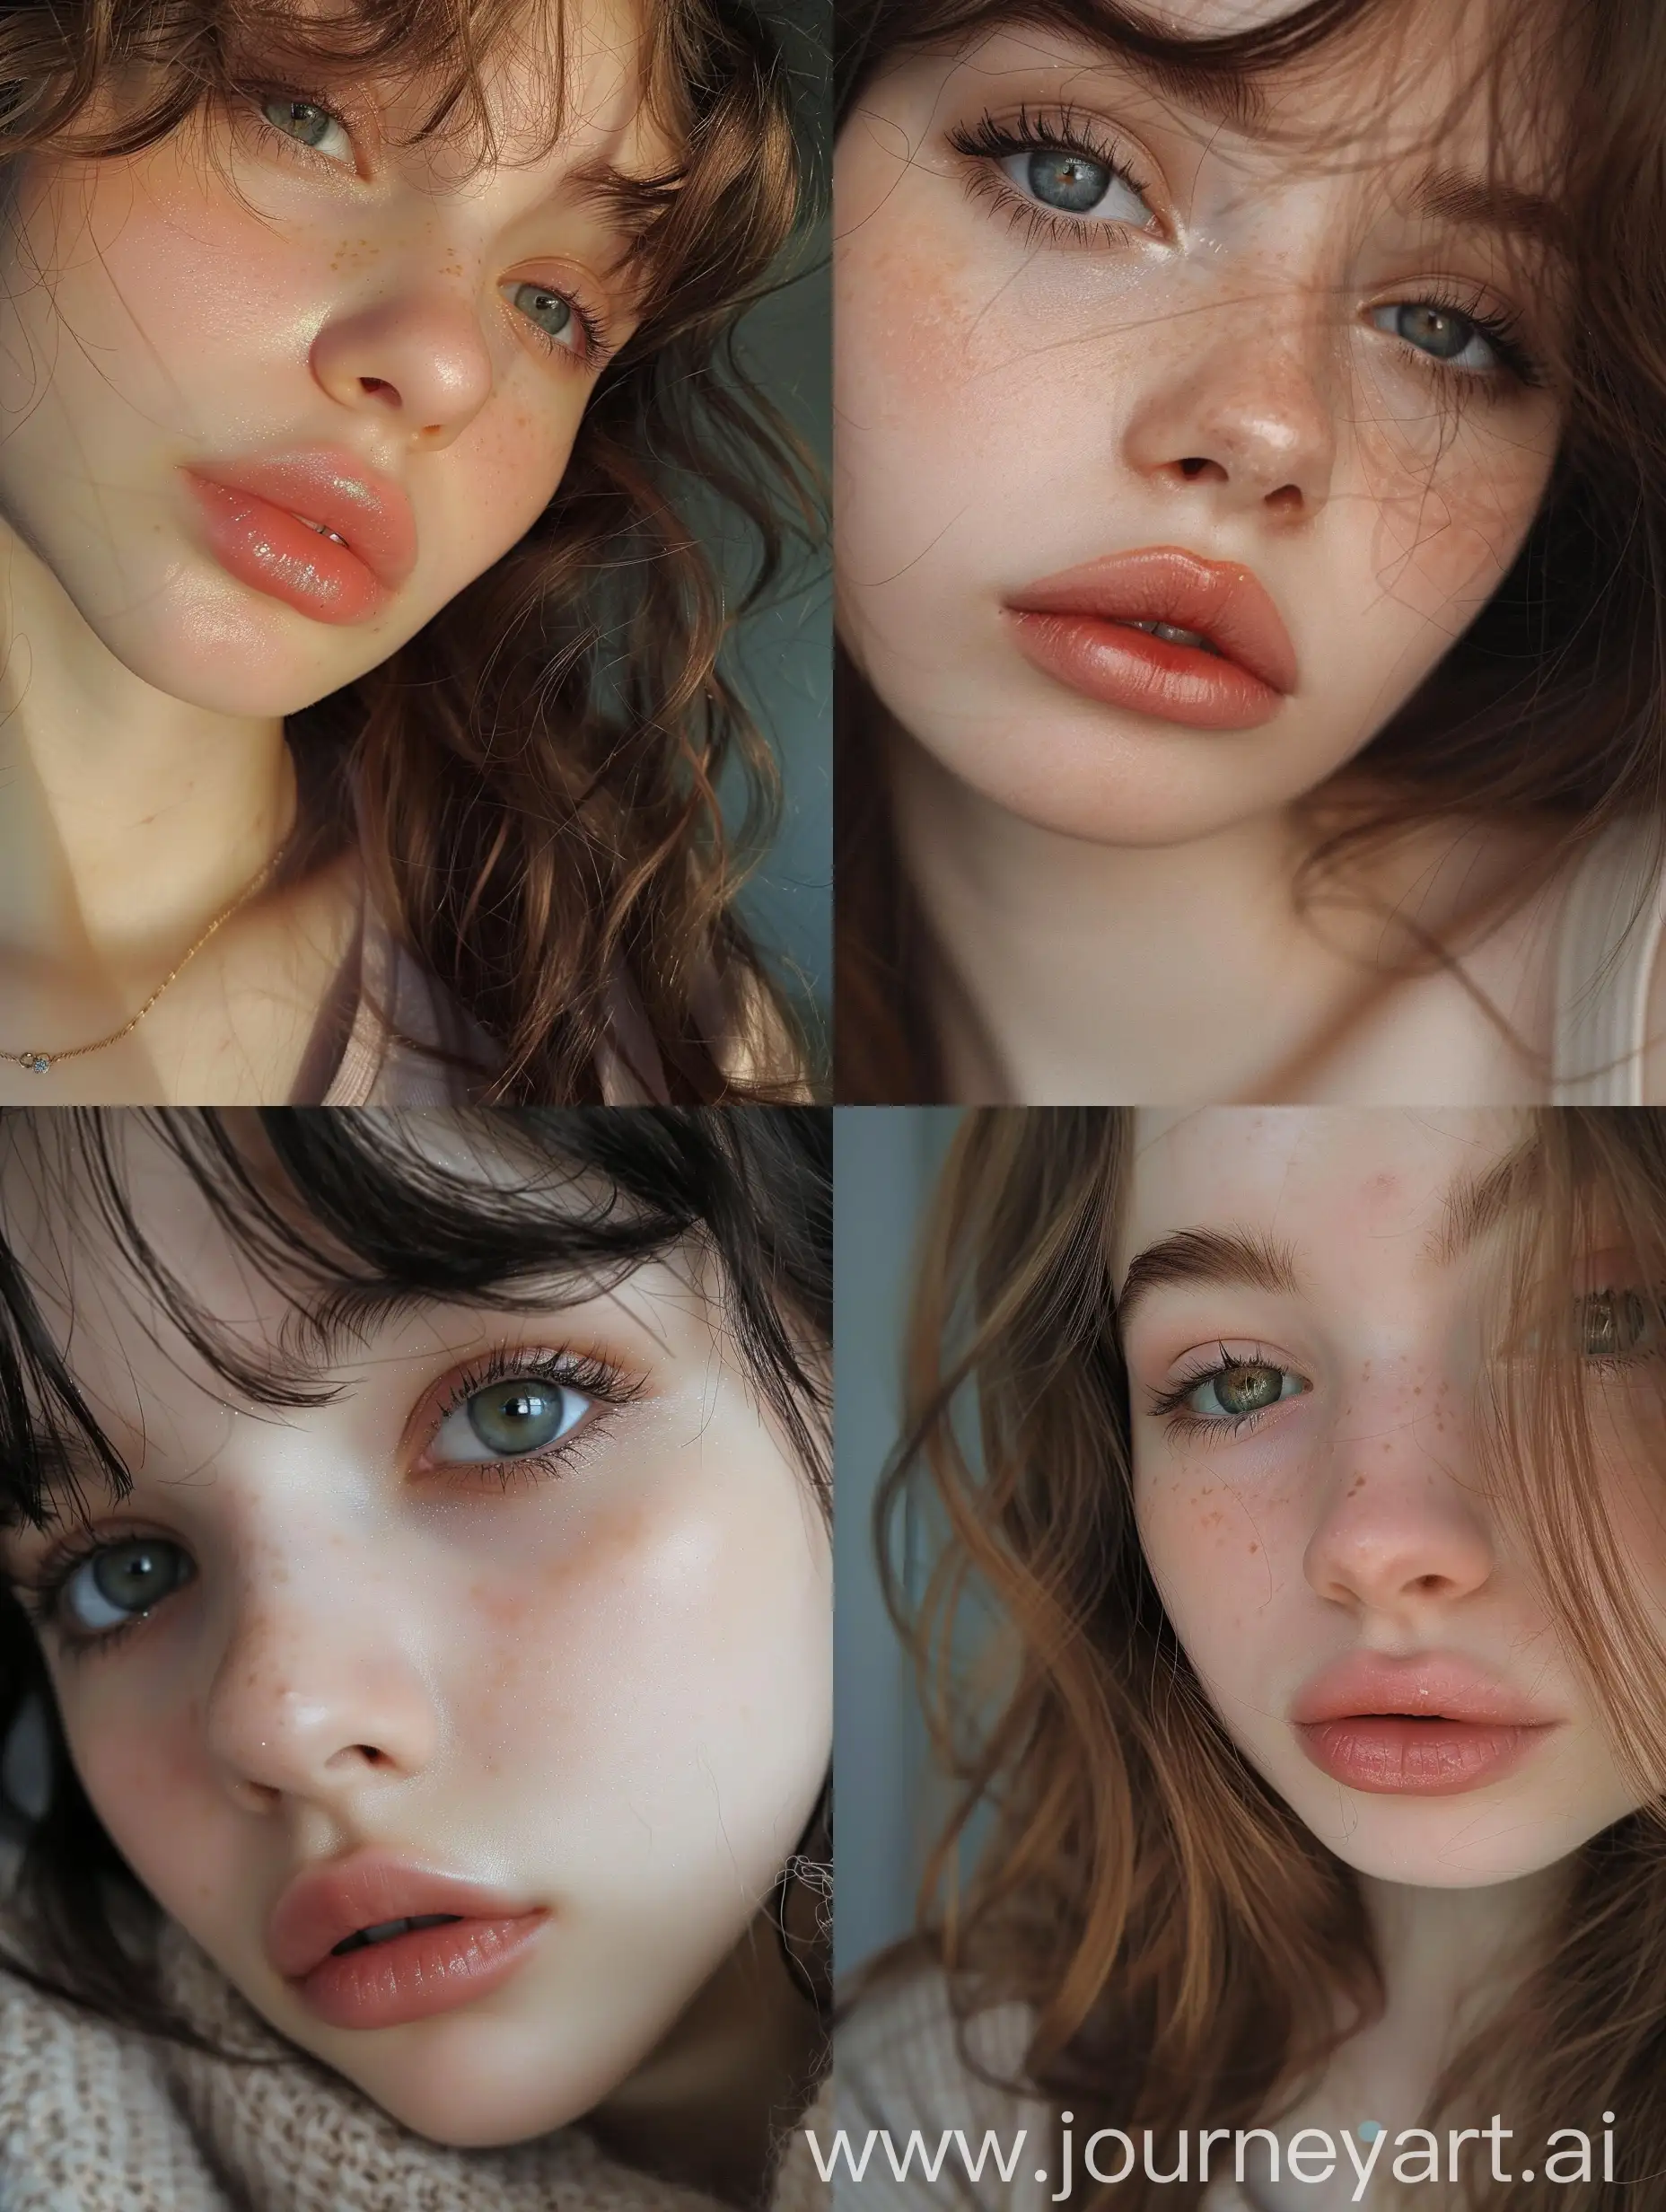 Aesthetic instagram selfie of a teenage girl super model, close up of face